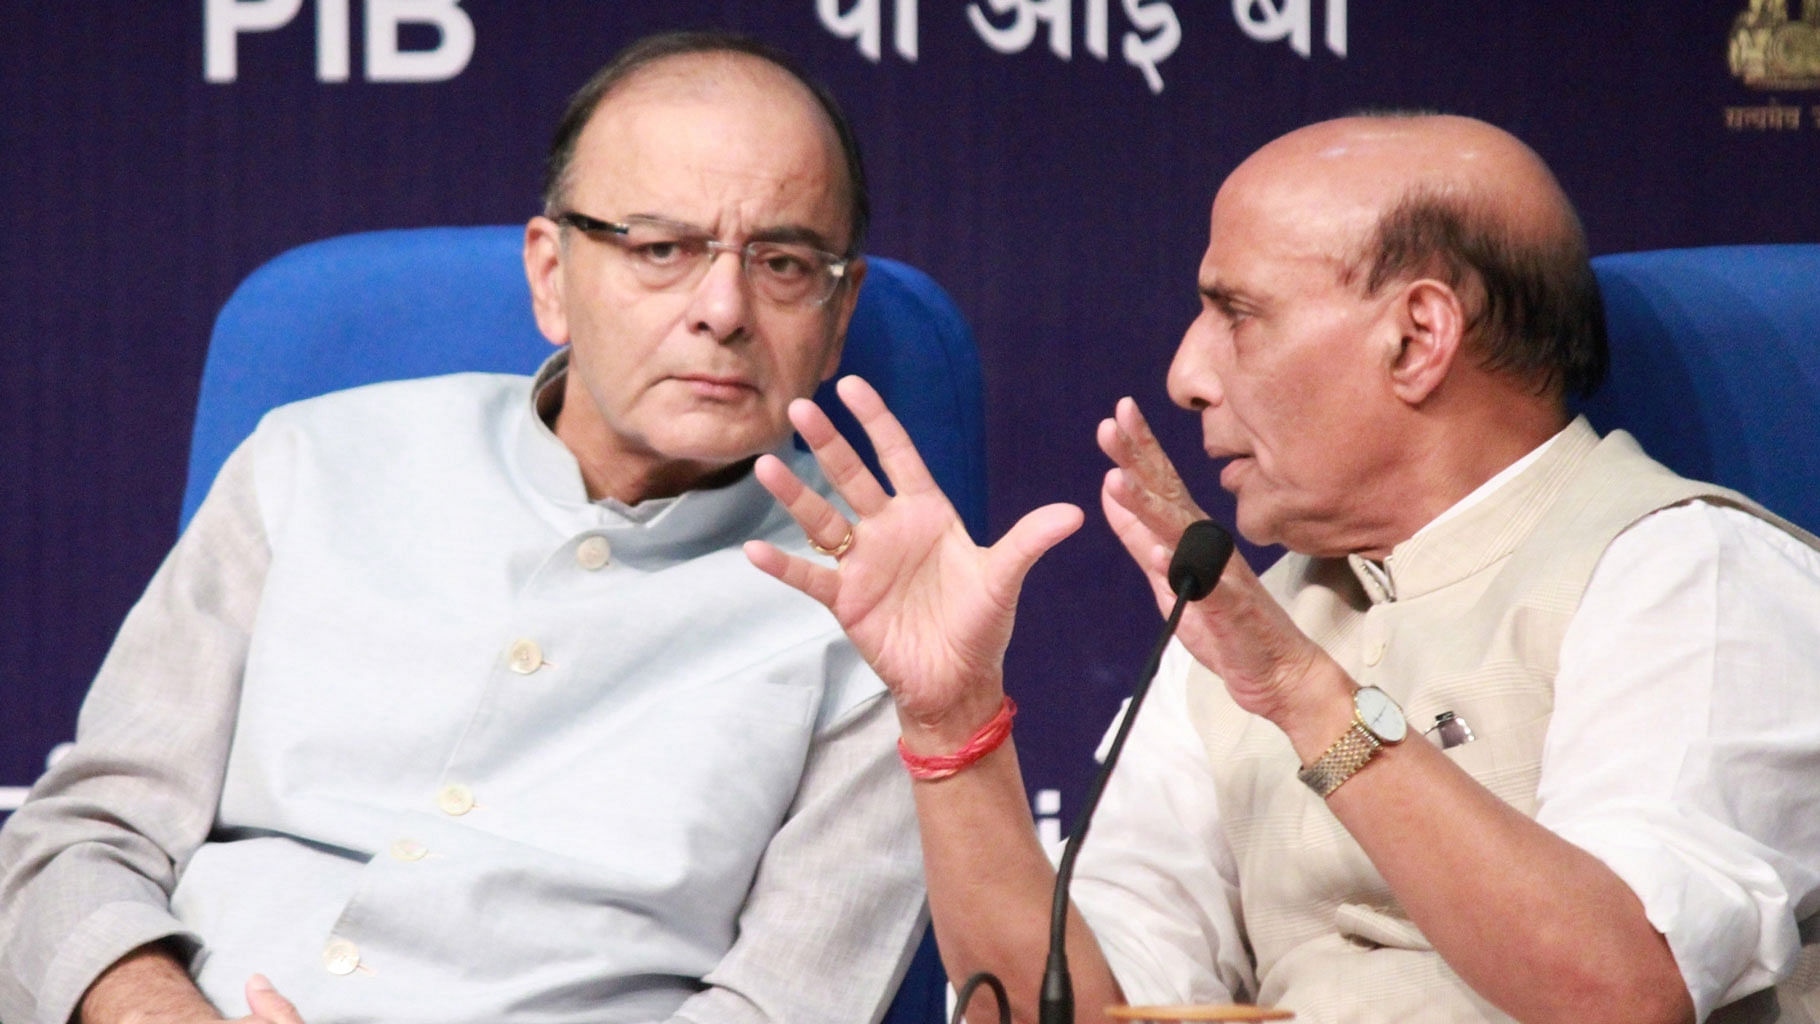 Home Minister Rajnath Singh and Union Minister for Finance and Corporate Affairs Arun Jaitley in New Delhi on 12 August 2016. (Photo: IANS)